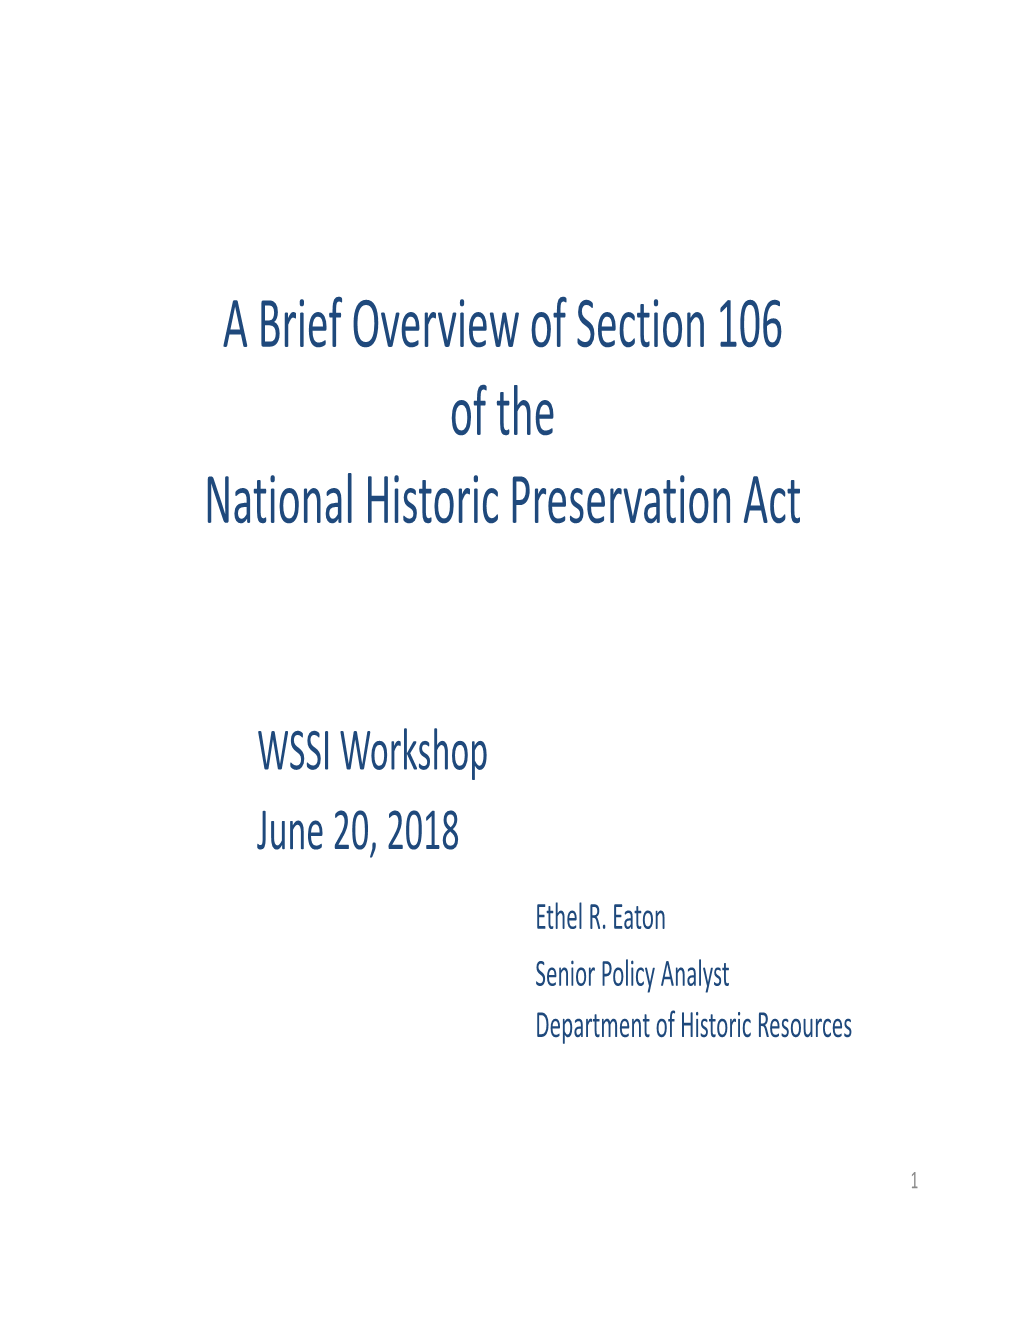 A Brief Overview of Section 106 of the National Historic Preservation Act